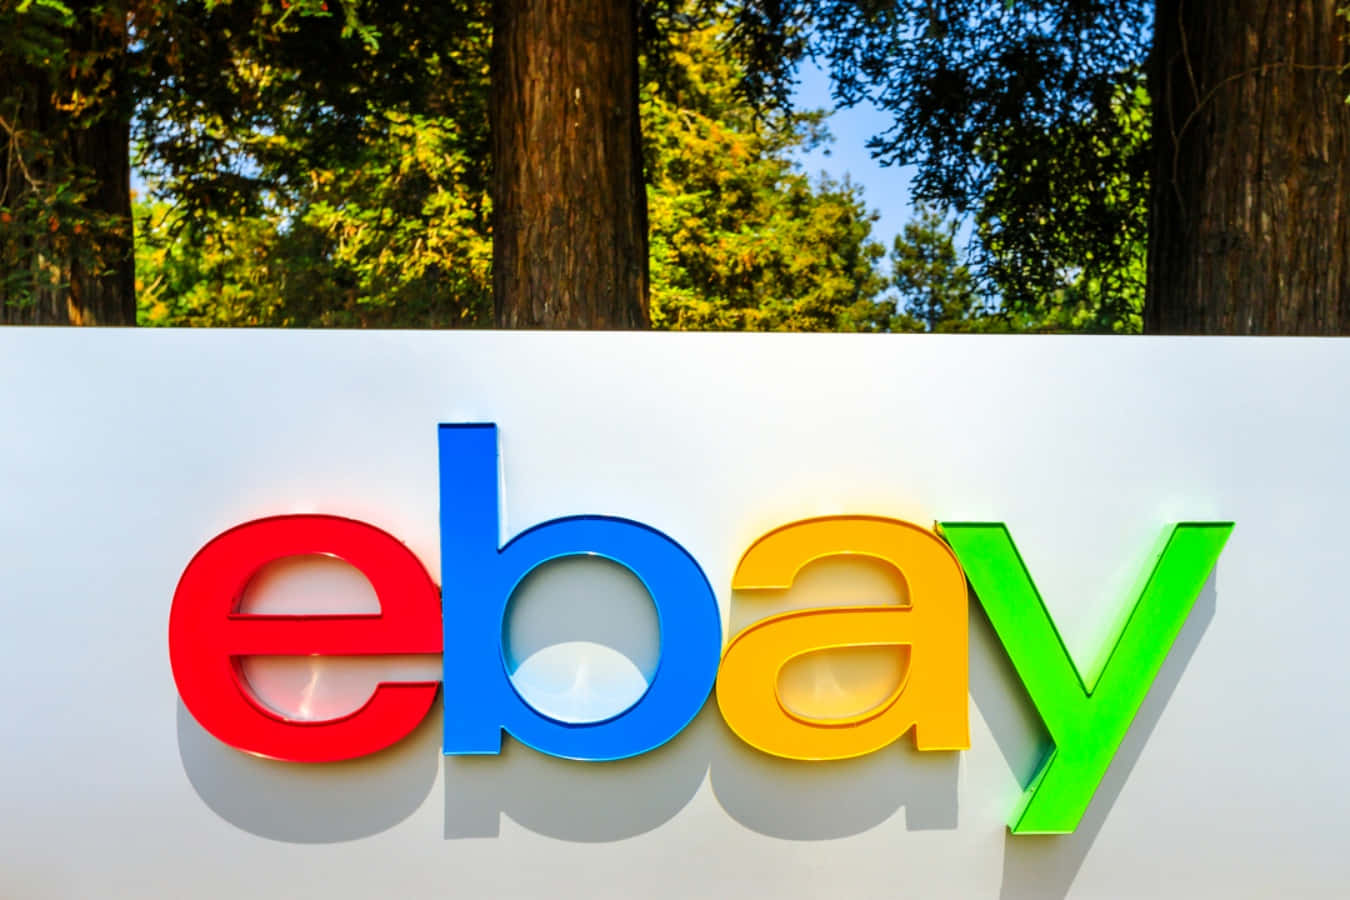 Ebay's New Logo Is Shown In Front Of Trees